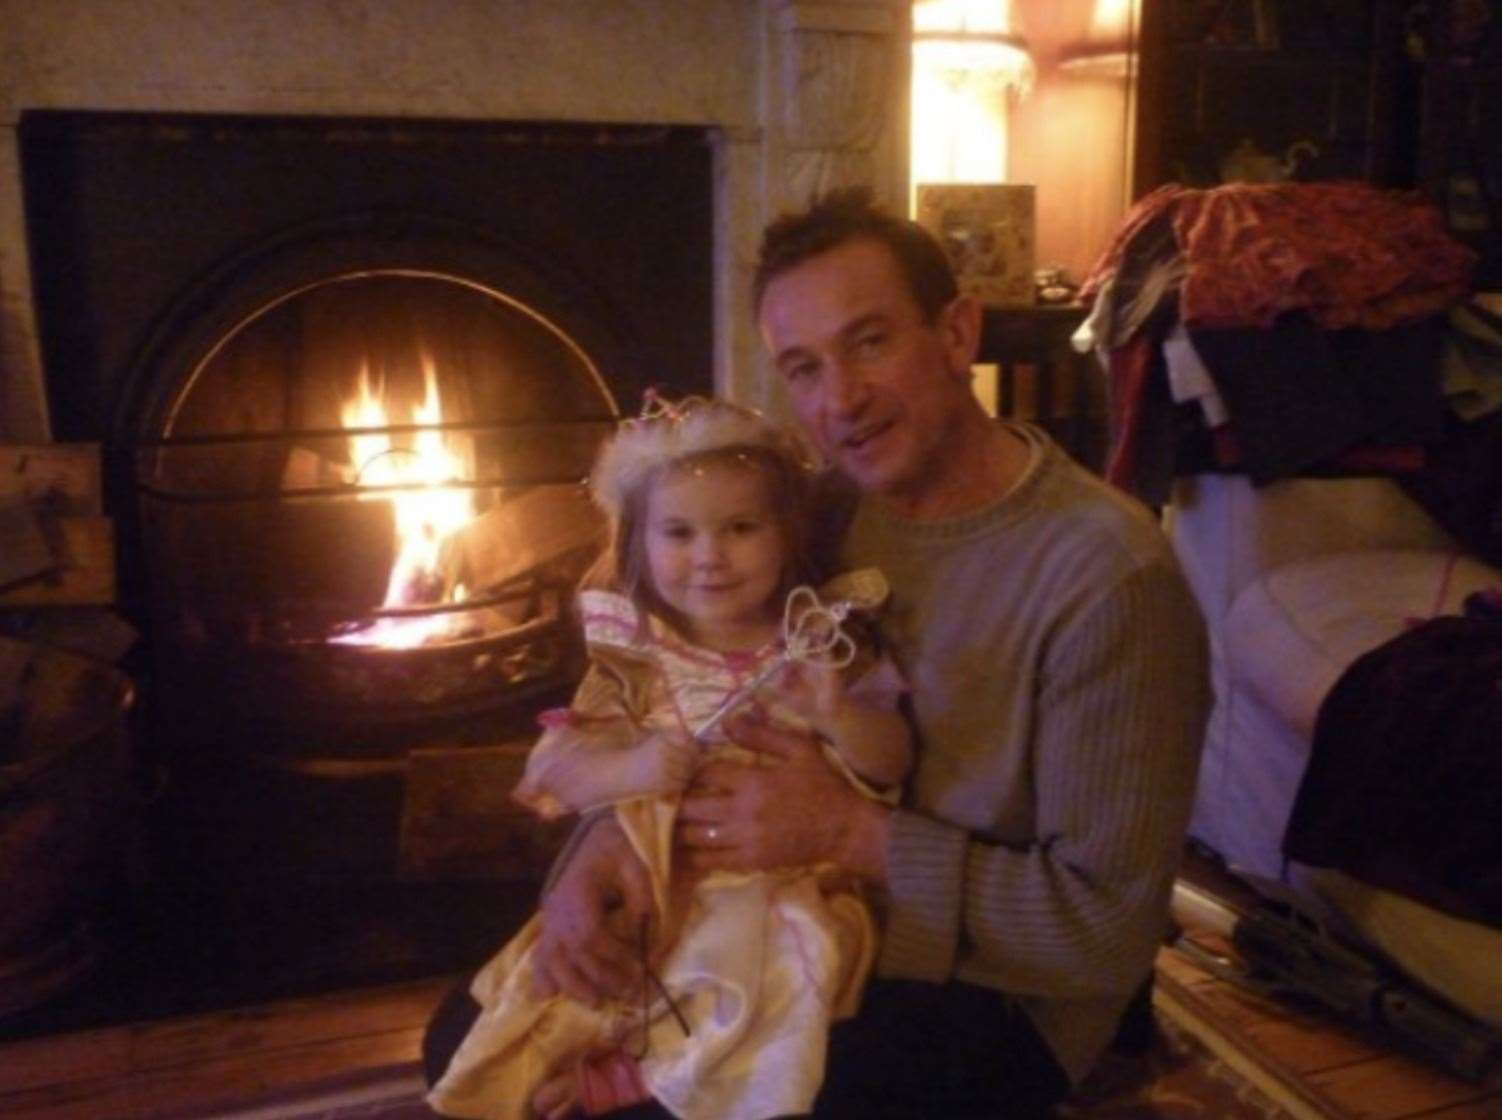 James Beckett, from Margate, went under the knife to donate part of his liver to his daughter